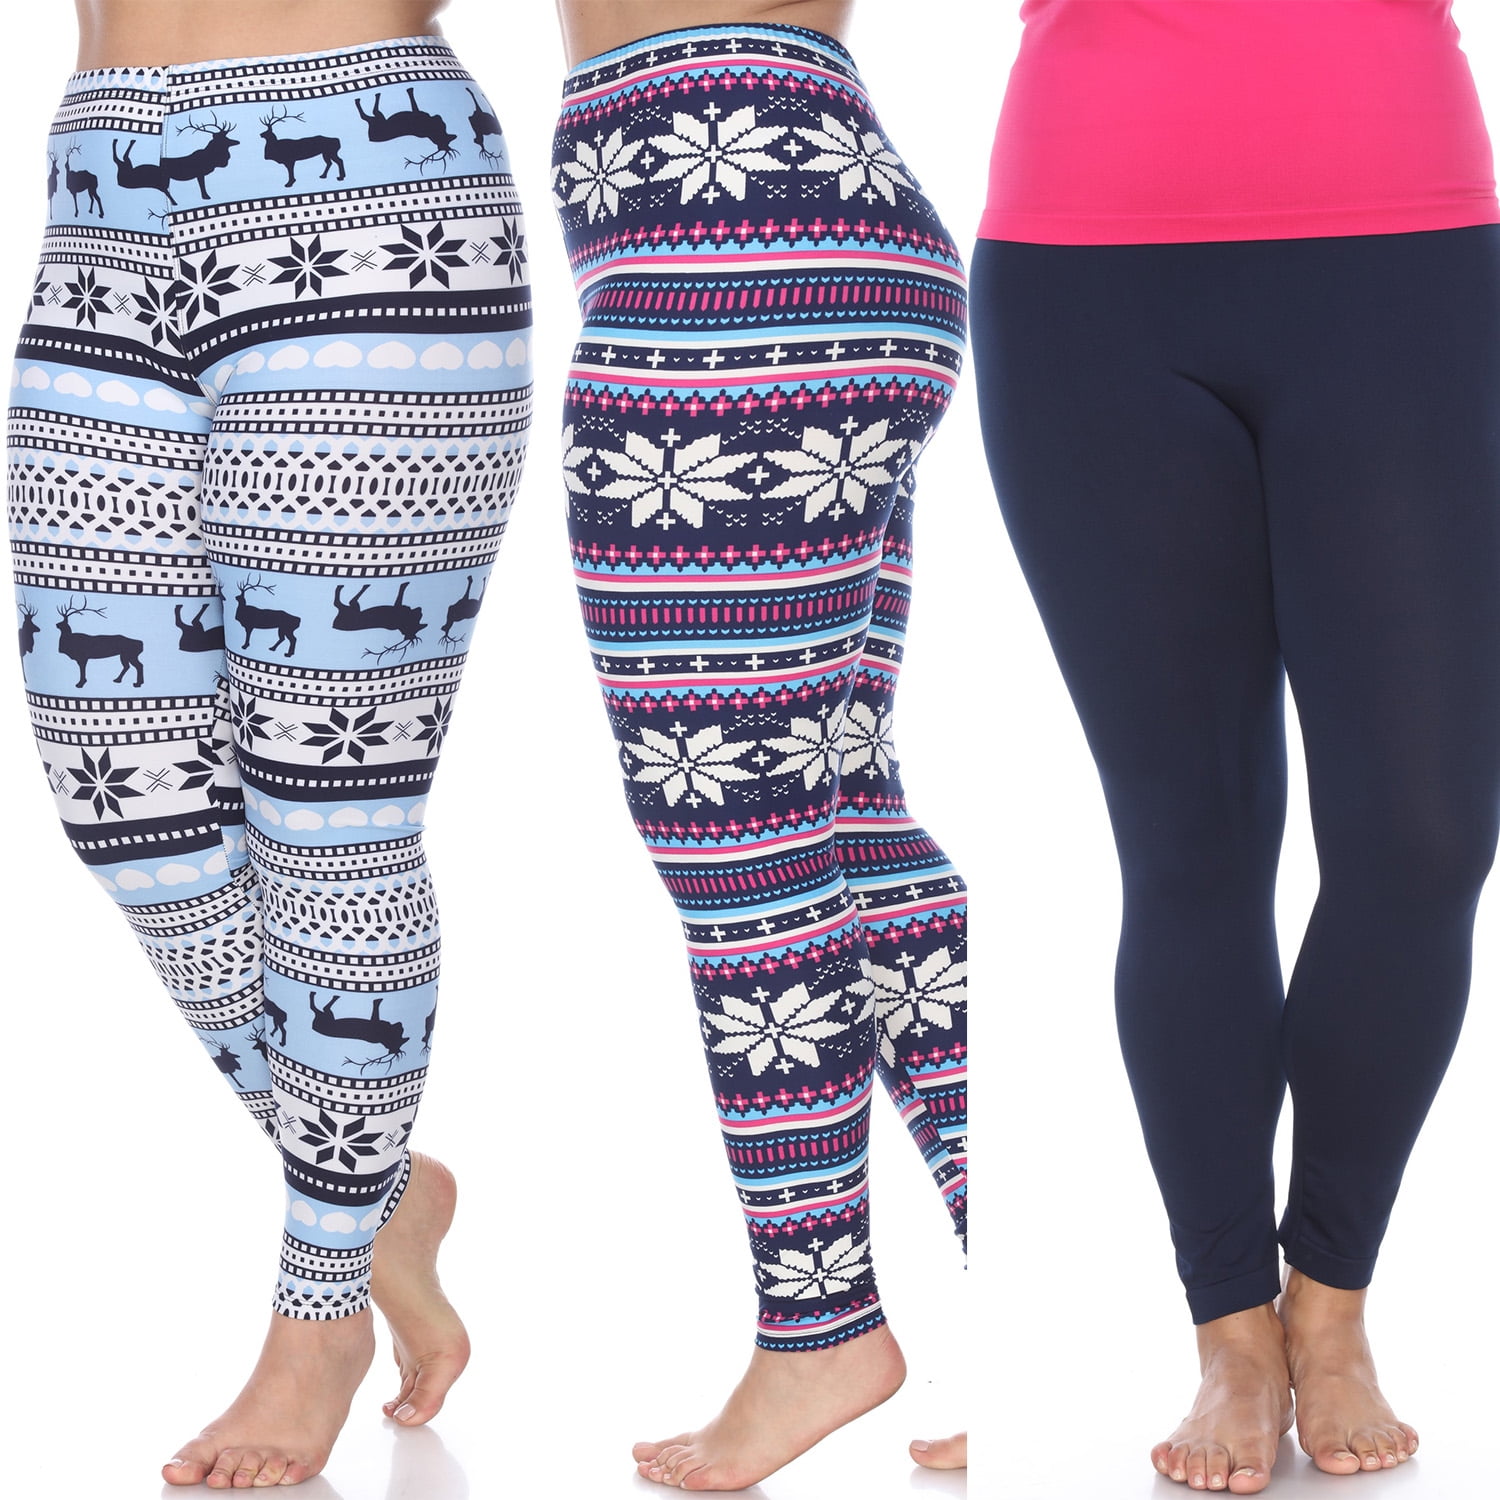 Women's Plus Size Printed Leggings Brown/white One Size Fits Most Plus -  White Mark : Target